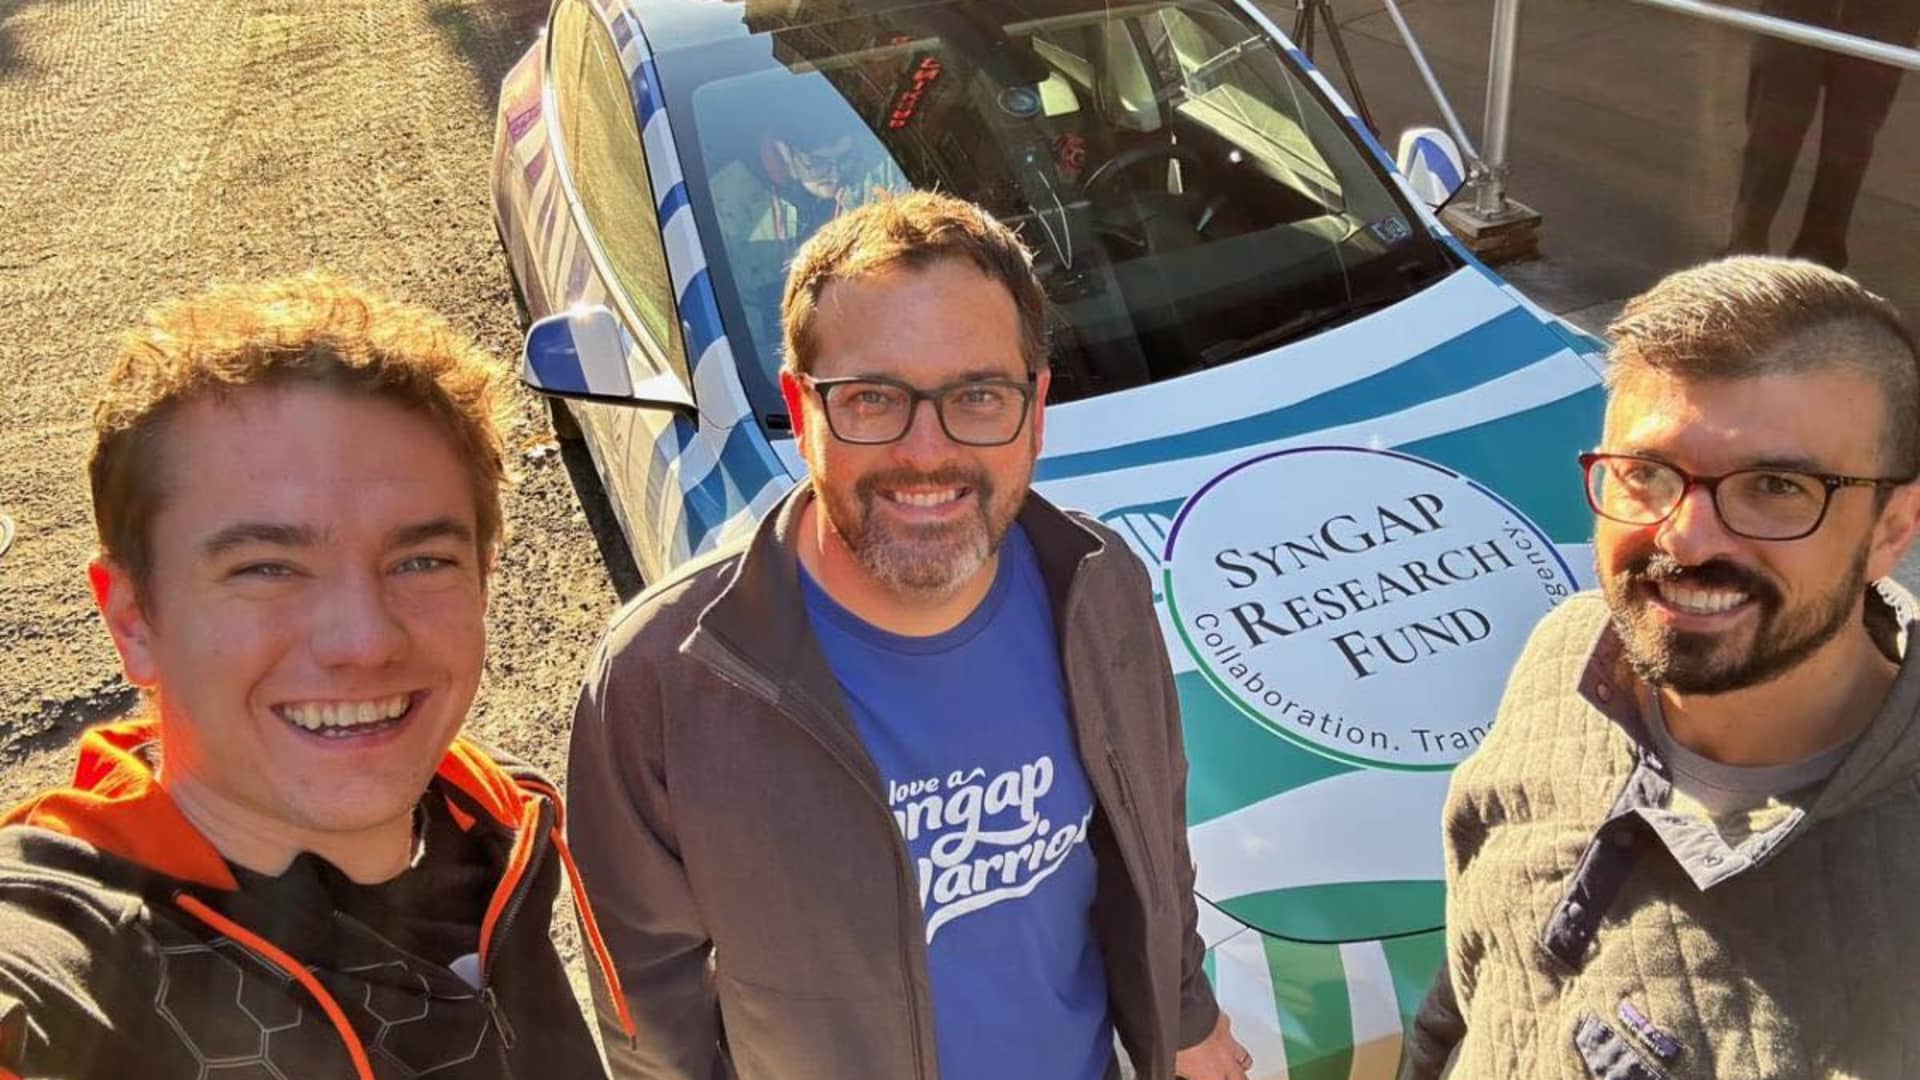 These dads drove over 57 hours, livestreamed the cross-country trip on YouTube and raised 6,000 for their kids’ rare genetic disease